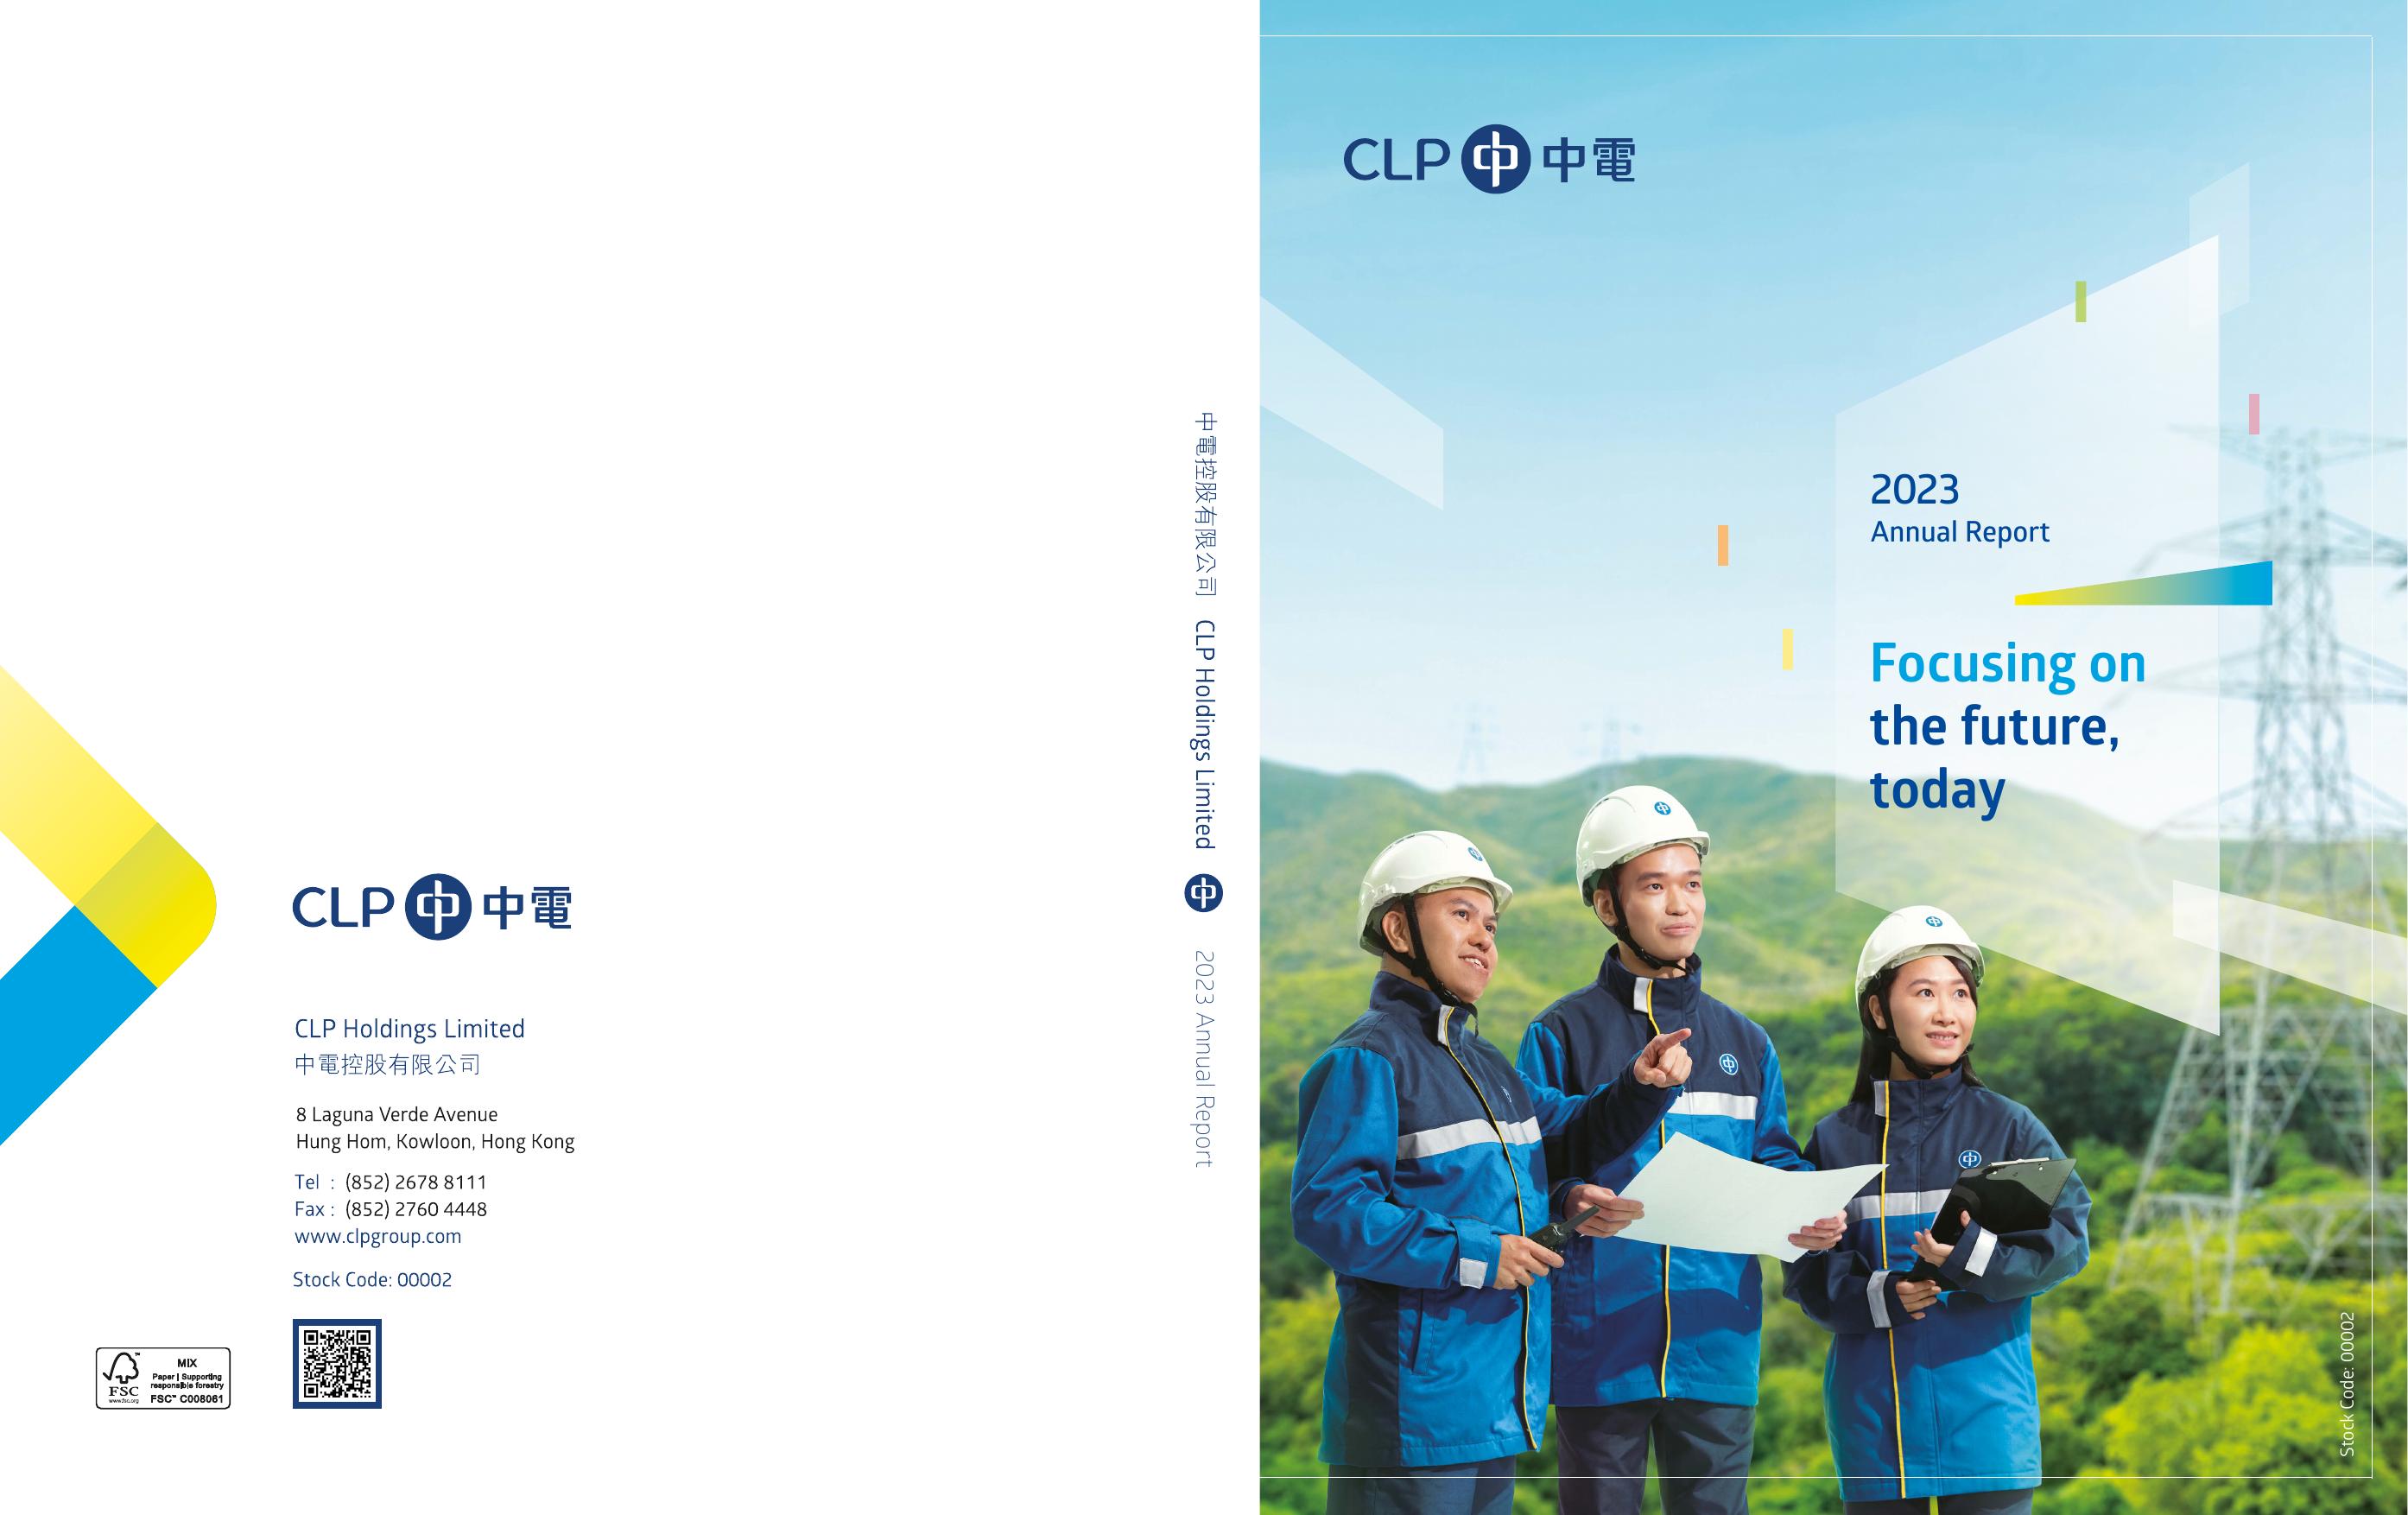 CLPGROUP 2023 Annual Report